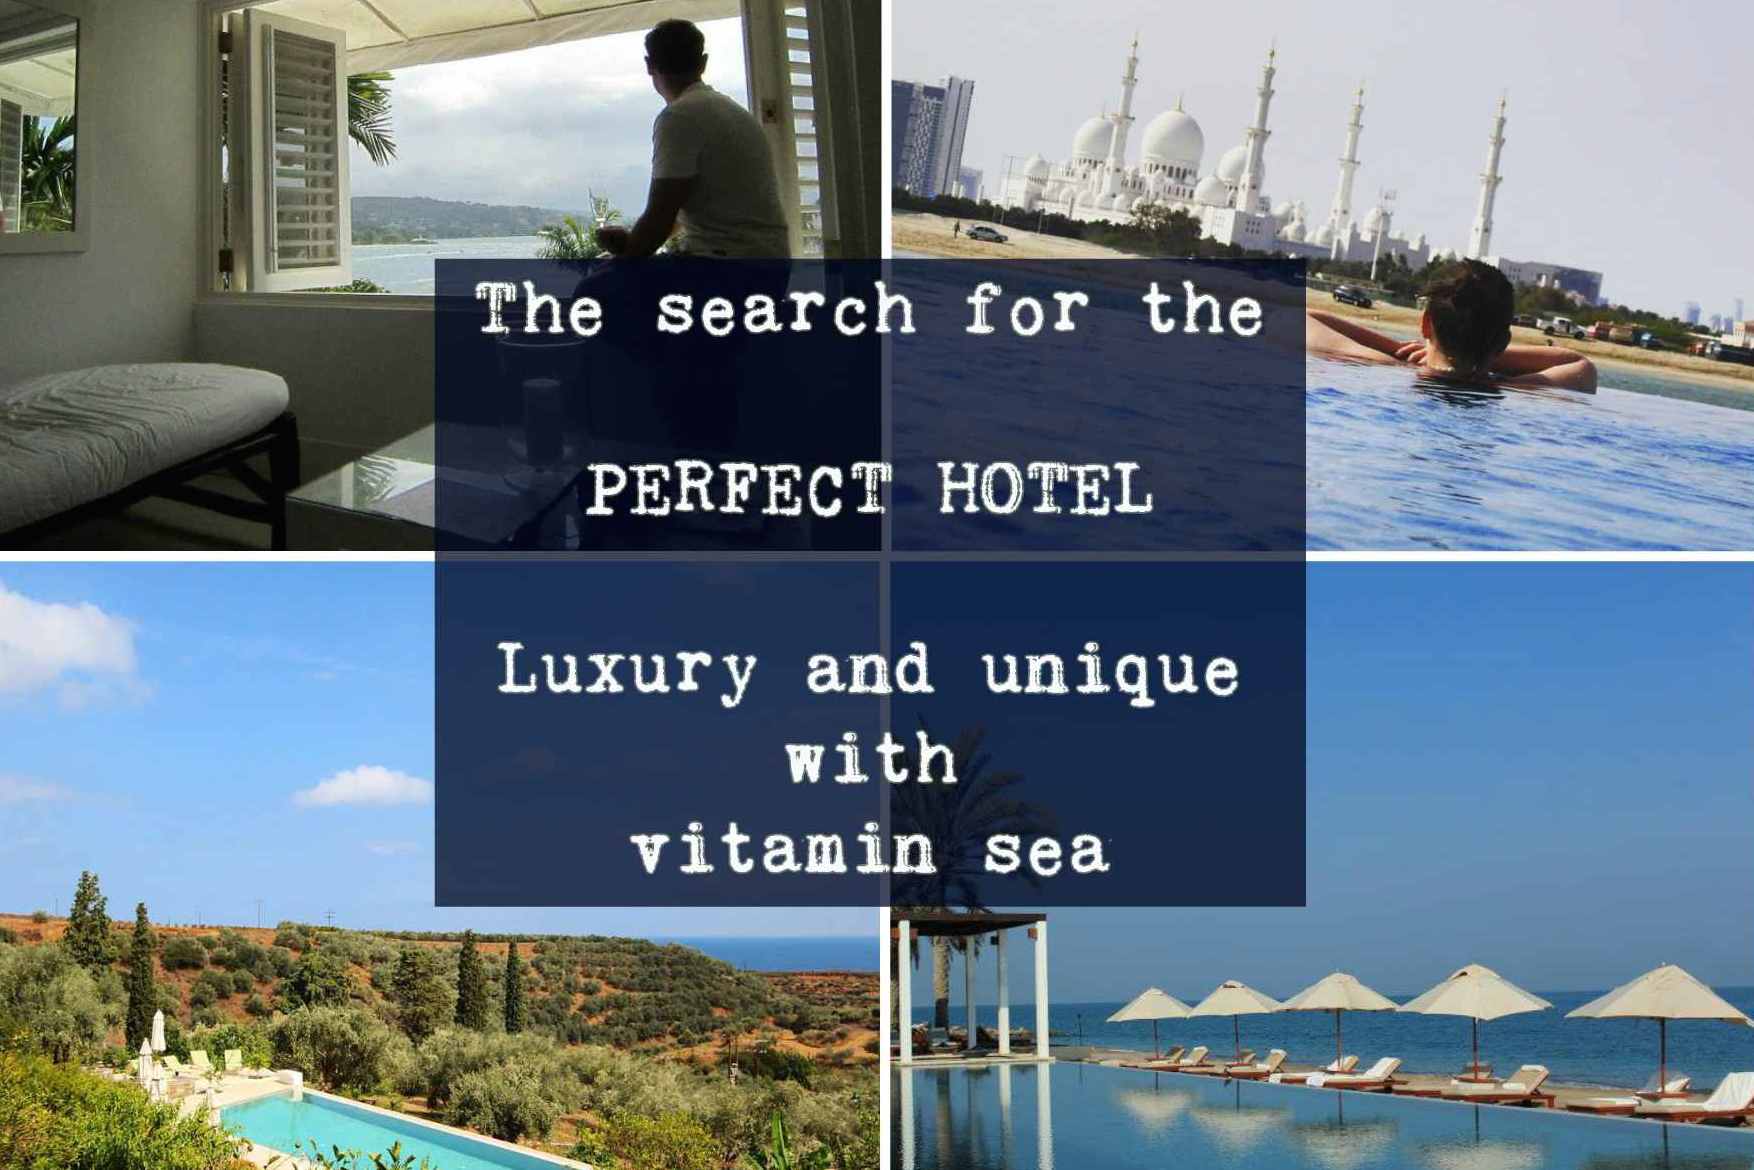 The search for the perfect hotel - luxury and unique with vitamin sea